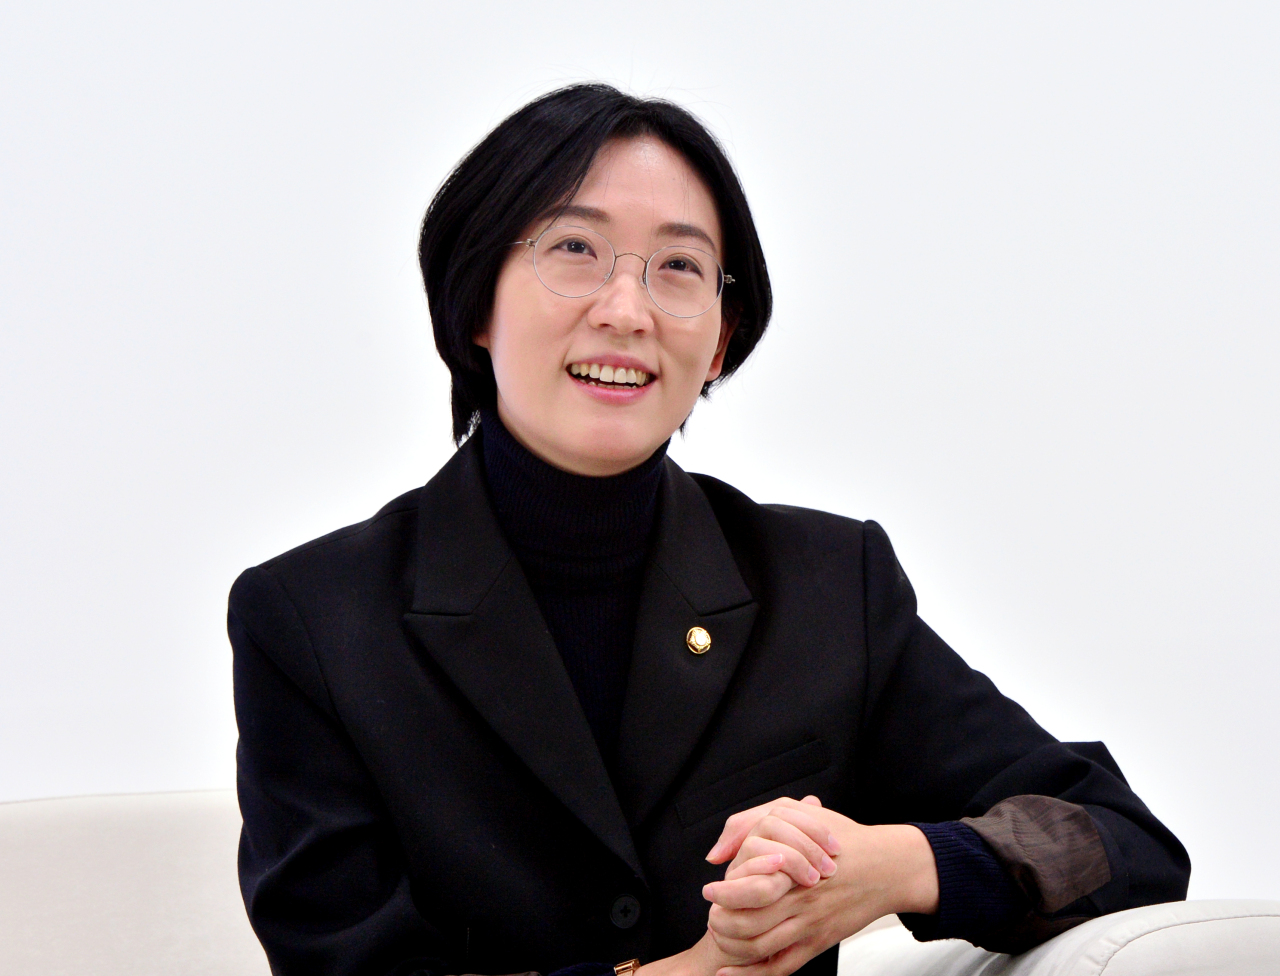 Justice Party Rep. Jang Hye-young at the Herald Studio in Seoul (Park Hyun-koo/The Korea Herald)